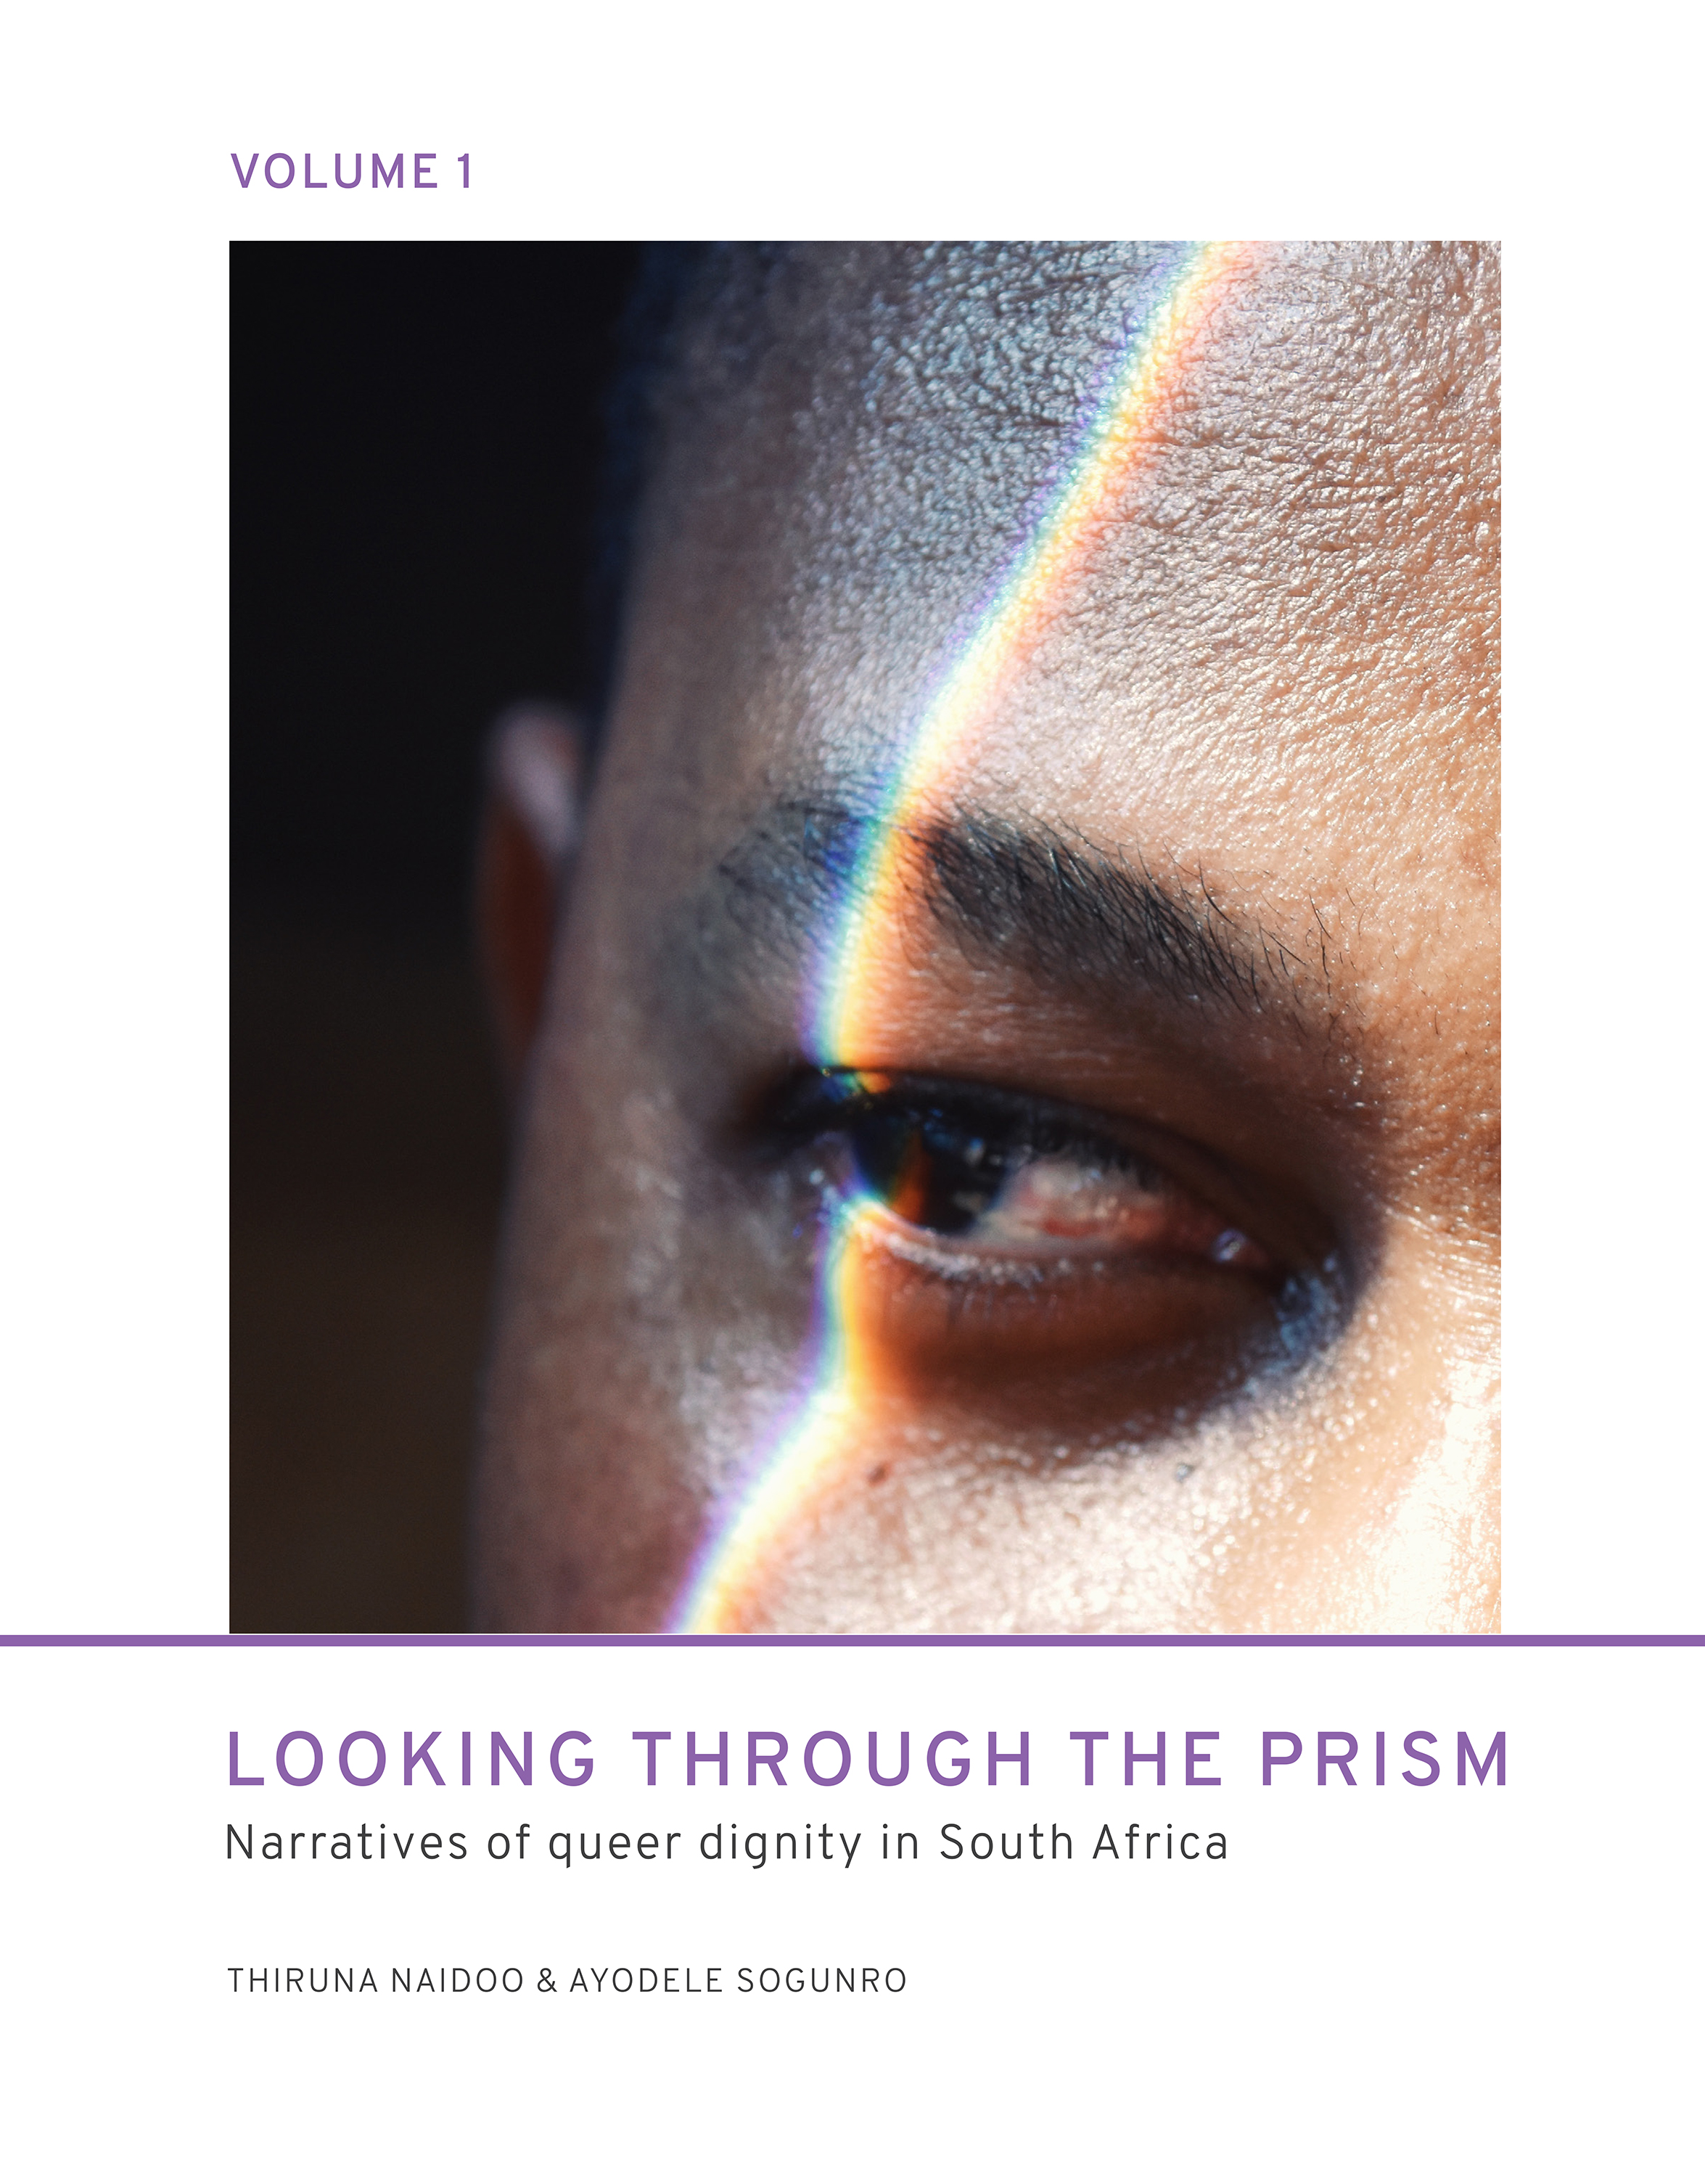 Looking through the prism: Queer dignity in South Africa